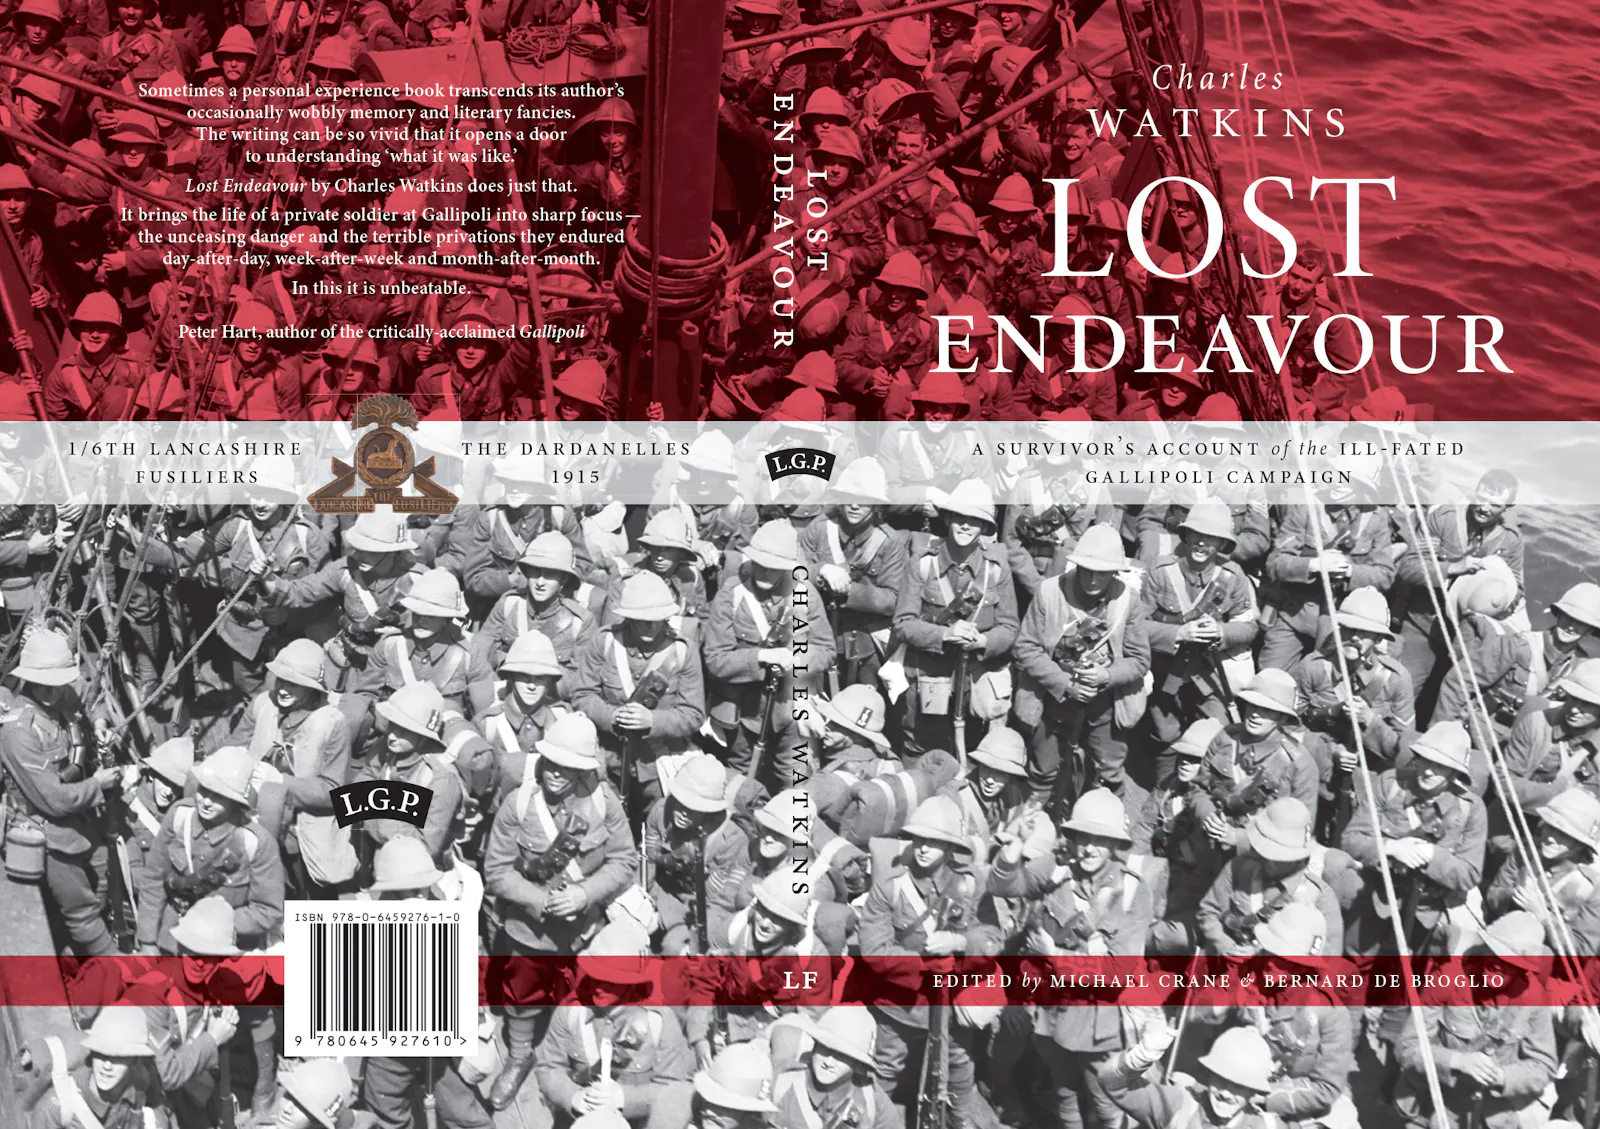 Lost Endeavour book cover.